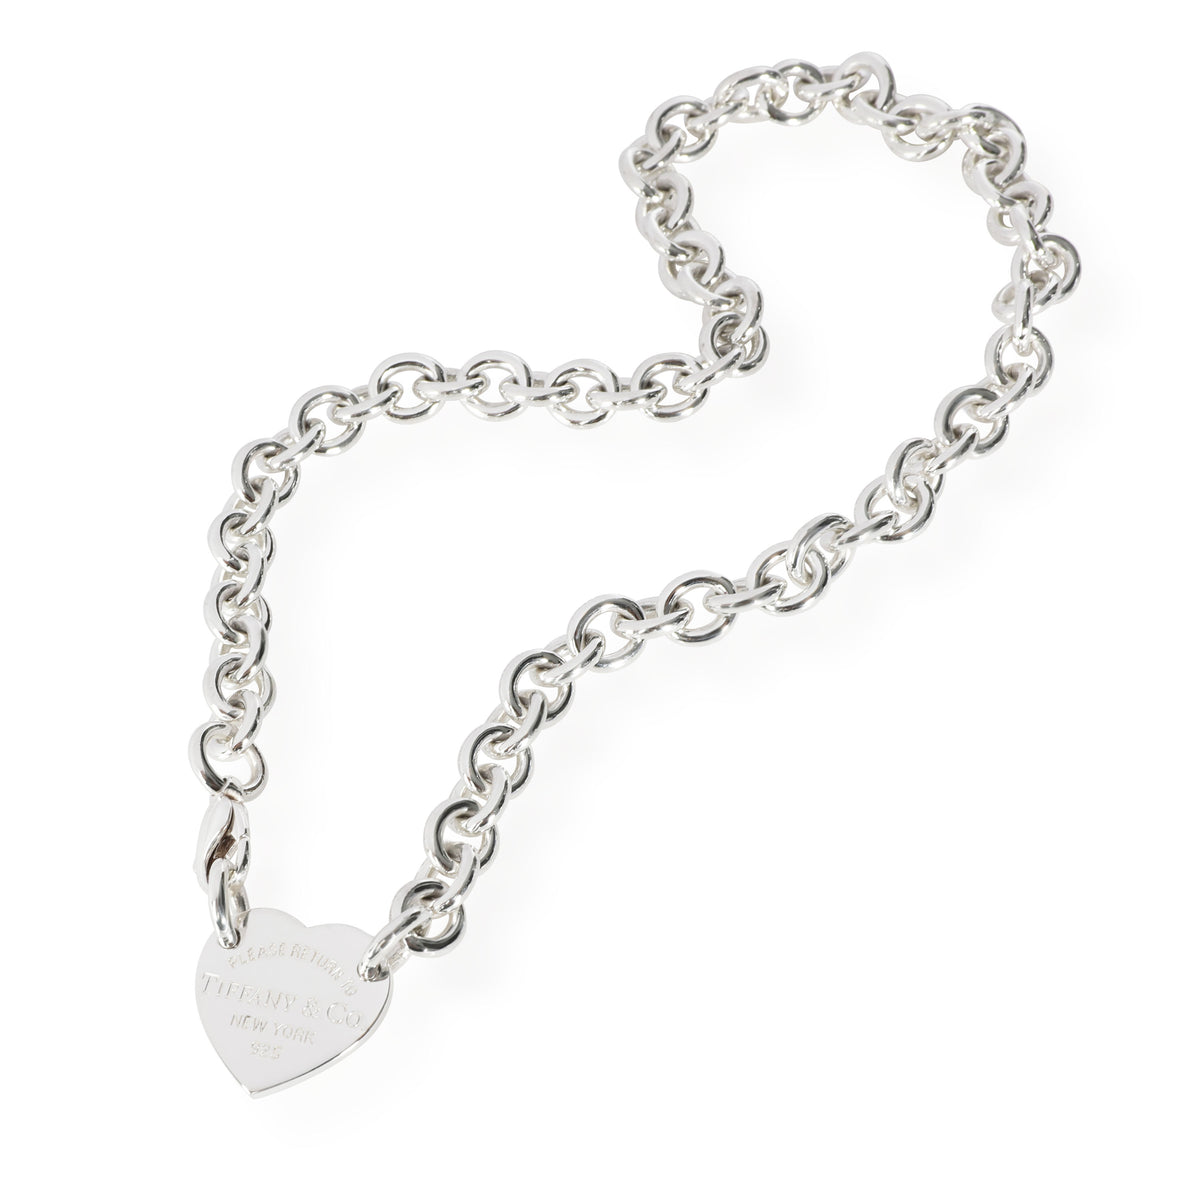 Tiffany & Co. Return to Tiffany Heart Choker Necklace in Sterling Silver